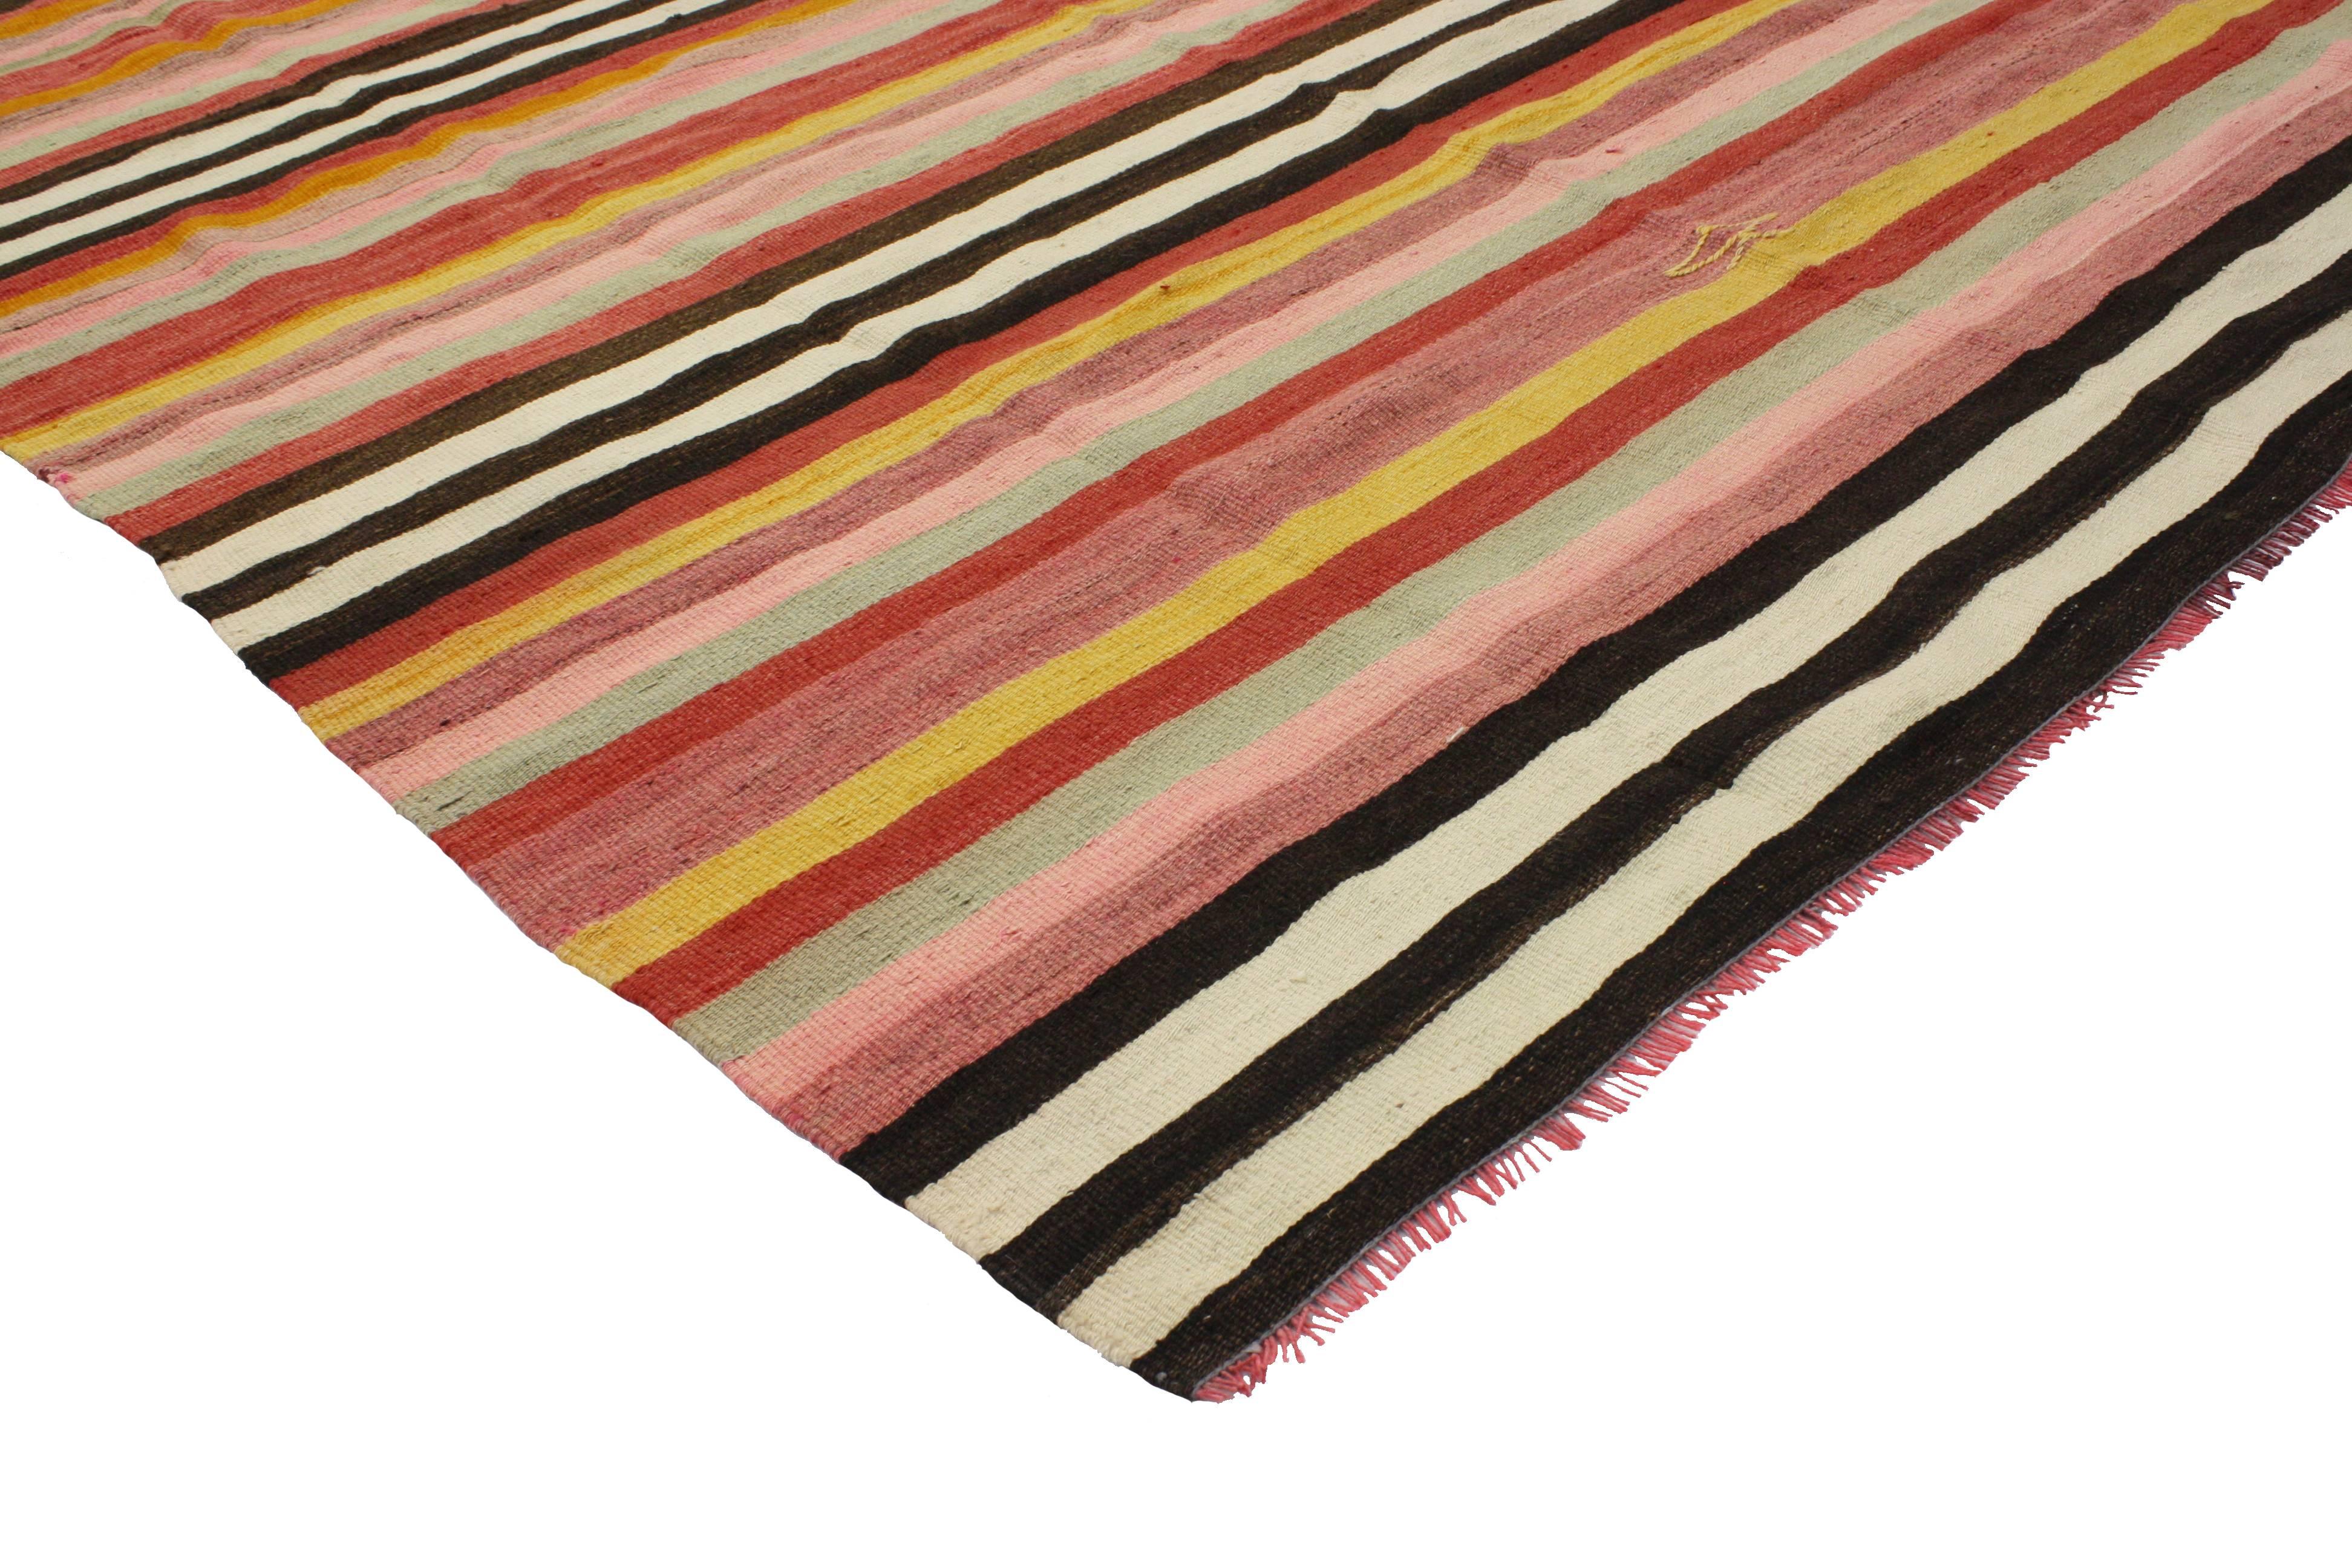 Boasting lively colors and impeccable weaving, this vintage Turkish Kilim rug with stripes features a Boho Chic style. A fine example of simplicity and universal appeal, this vintage Kilim rug embodies the modern concept of less is more. Rendered